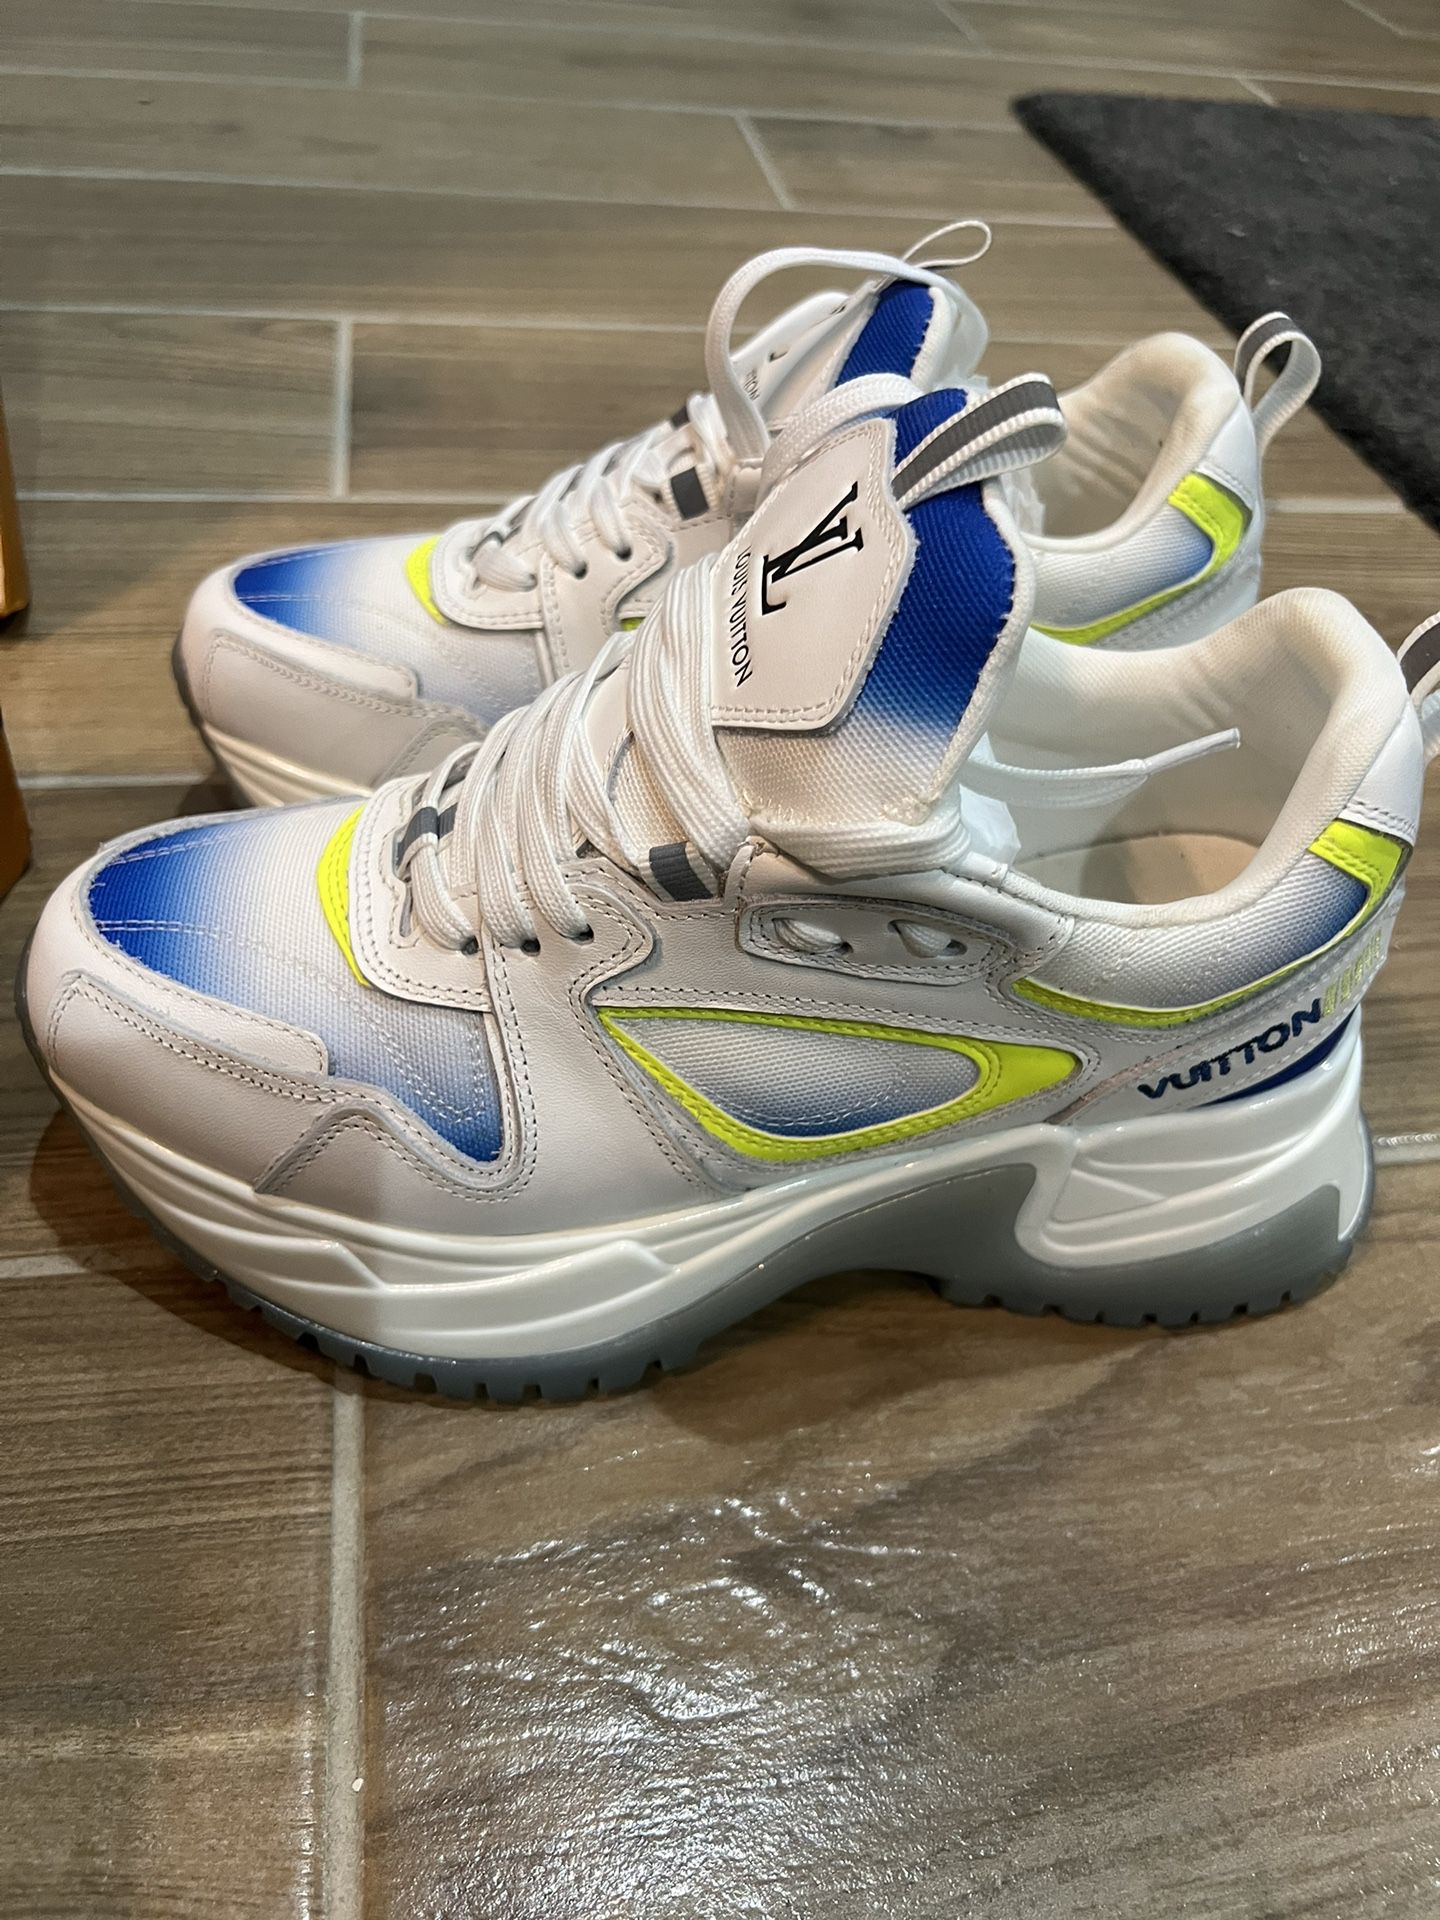 Louis Vuitton Frontrow Sneakers for Sale in Milpitas, CA - OfferUp